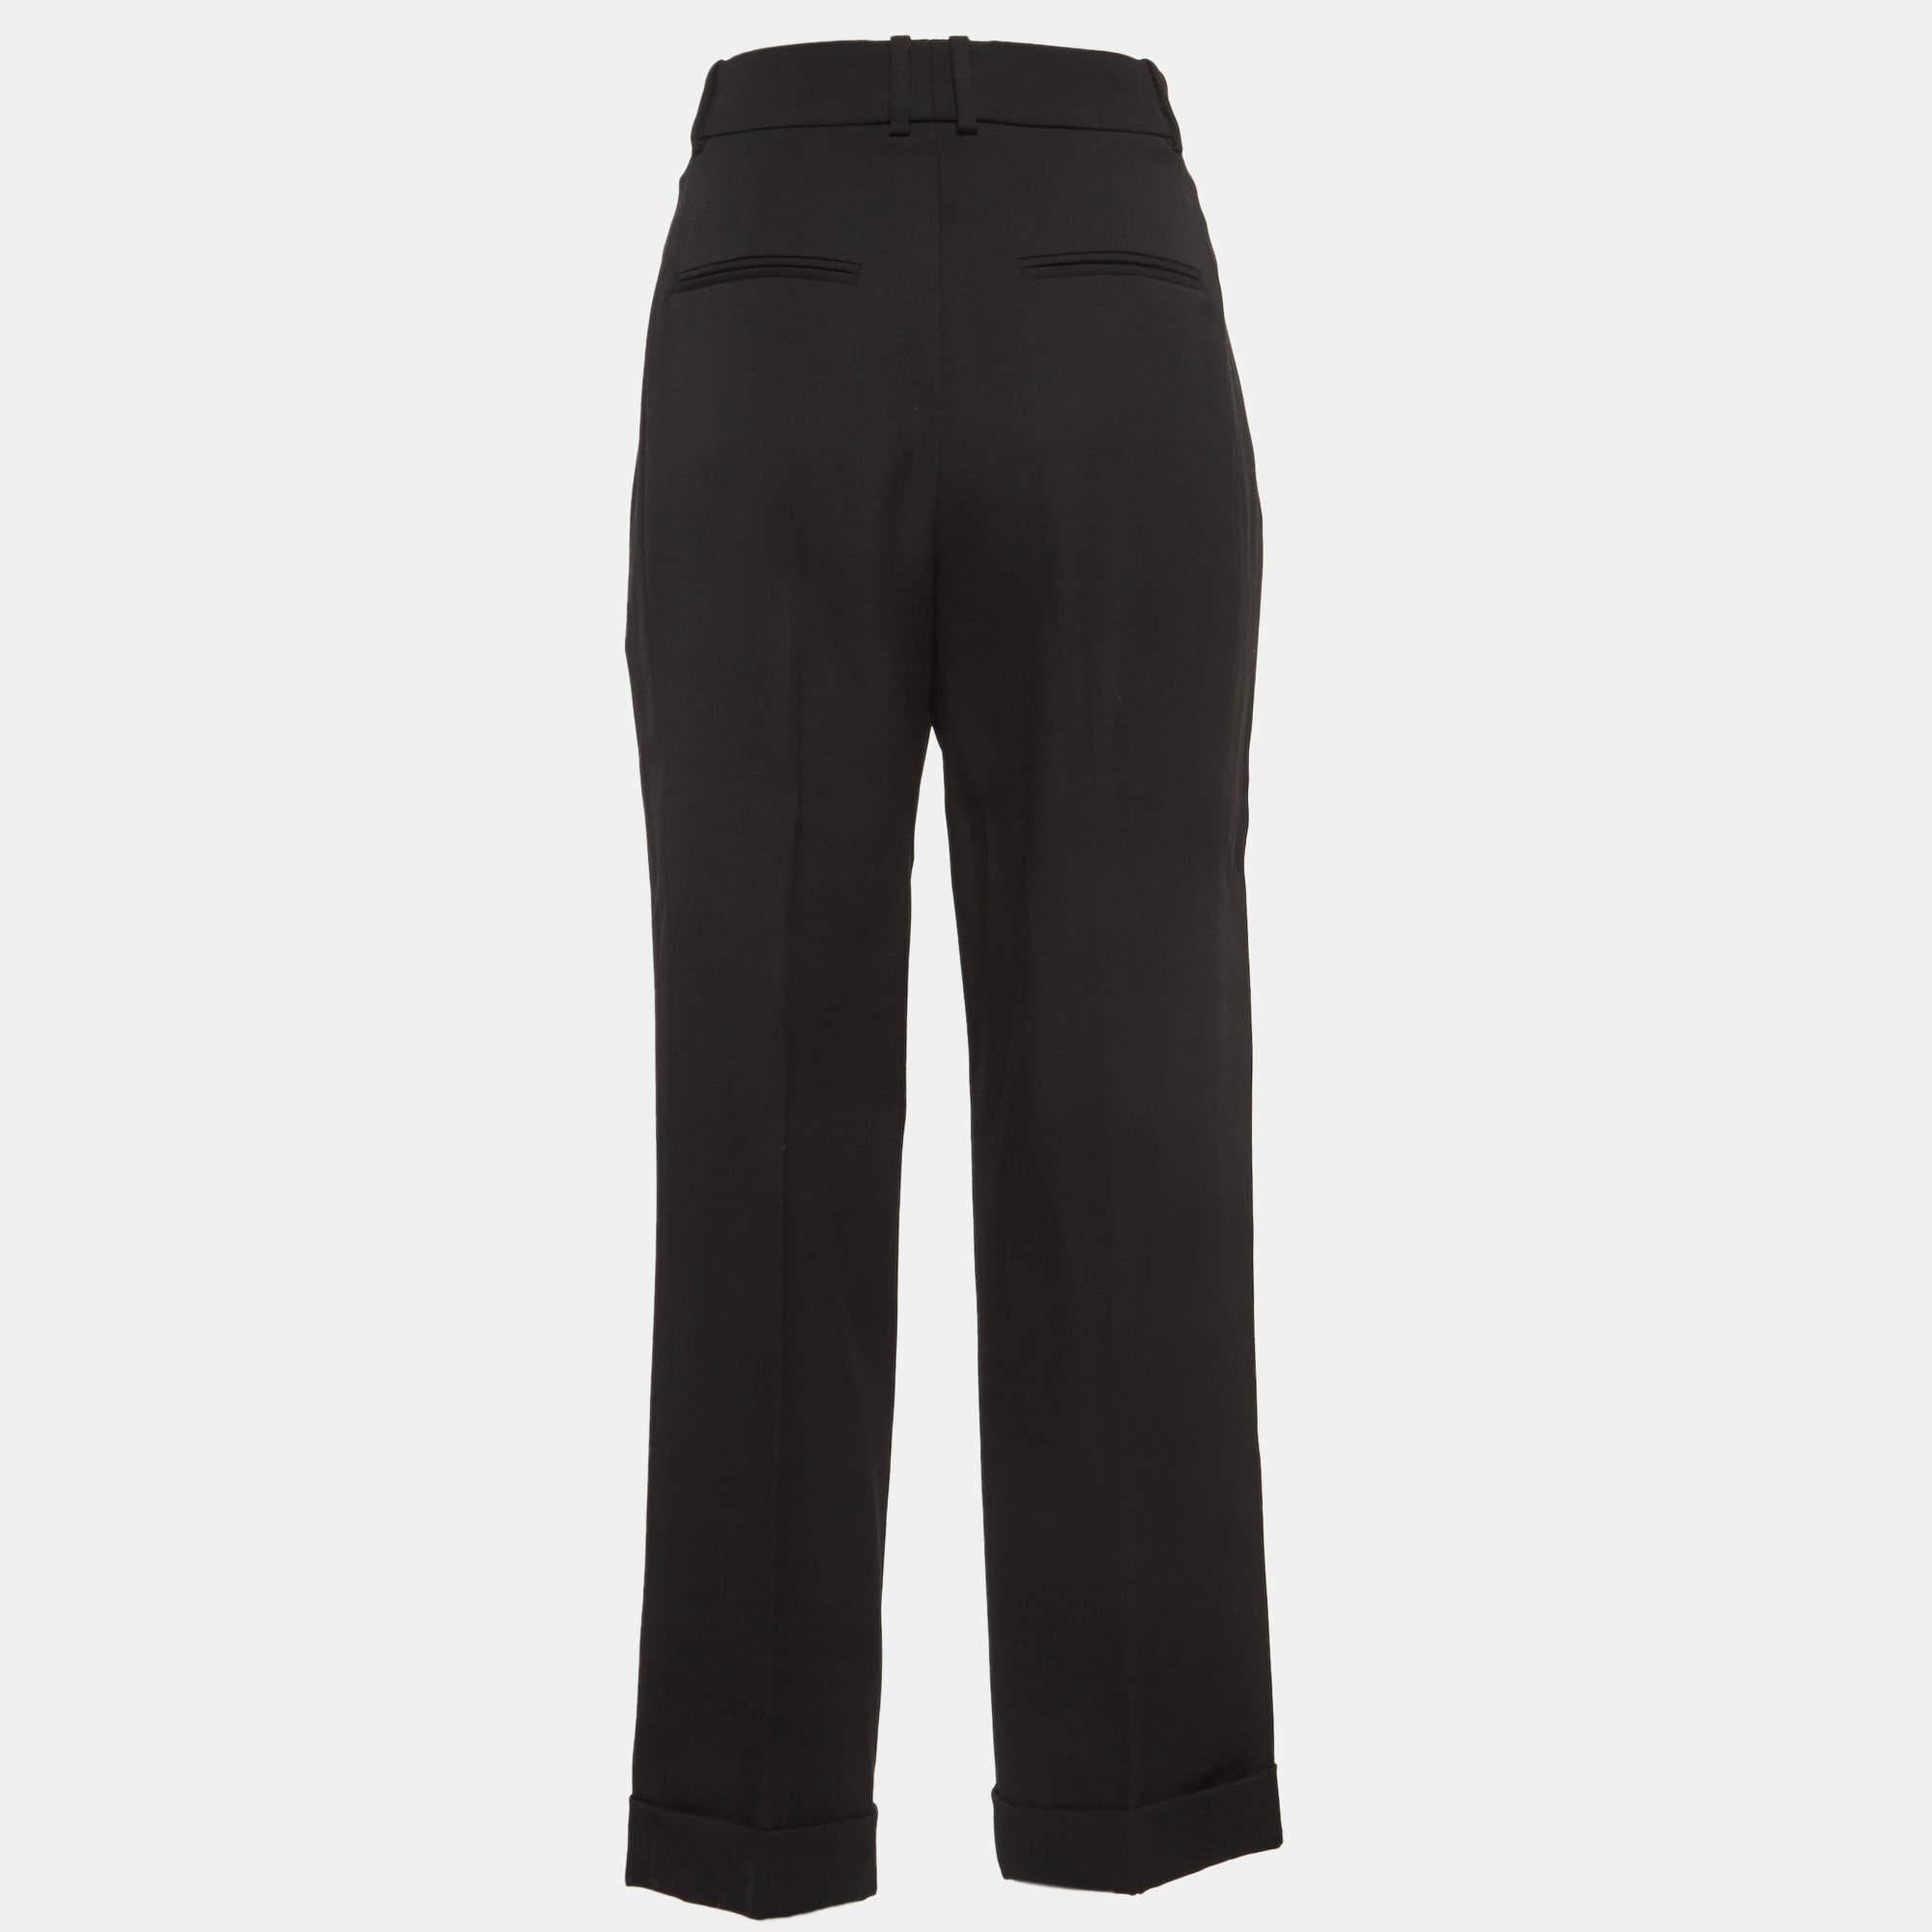 Enhance your formal attire with this pair of Saint Laurent trousers. Designed into a superb silhouette and fit, this pair of trousers will make you look elegant.

